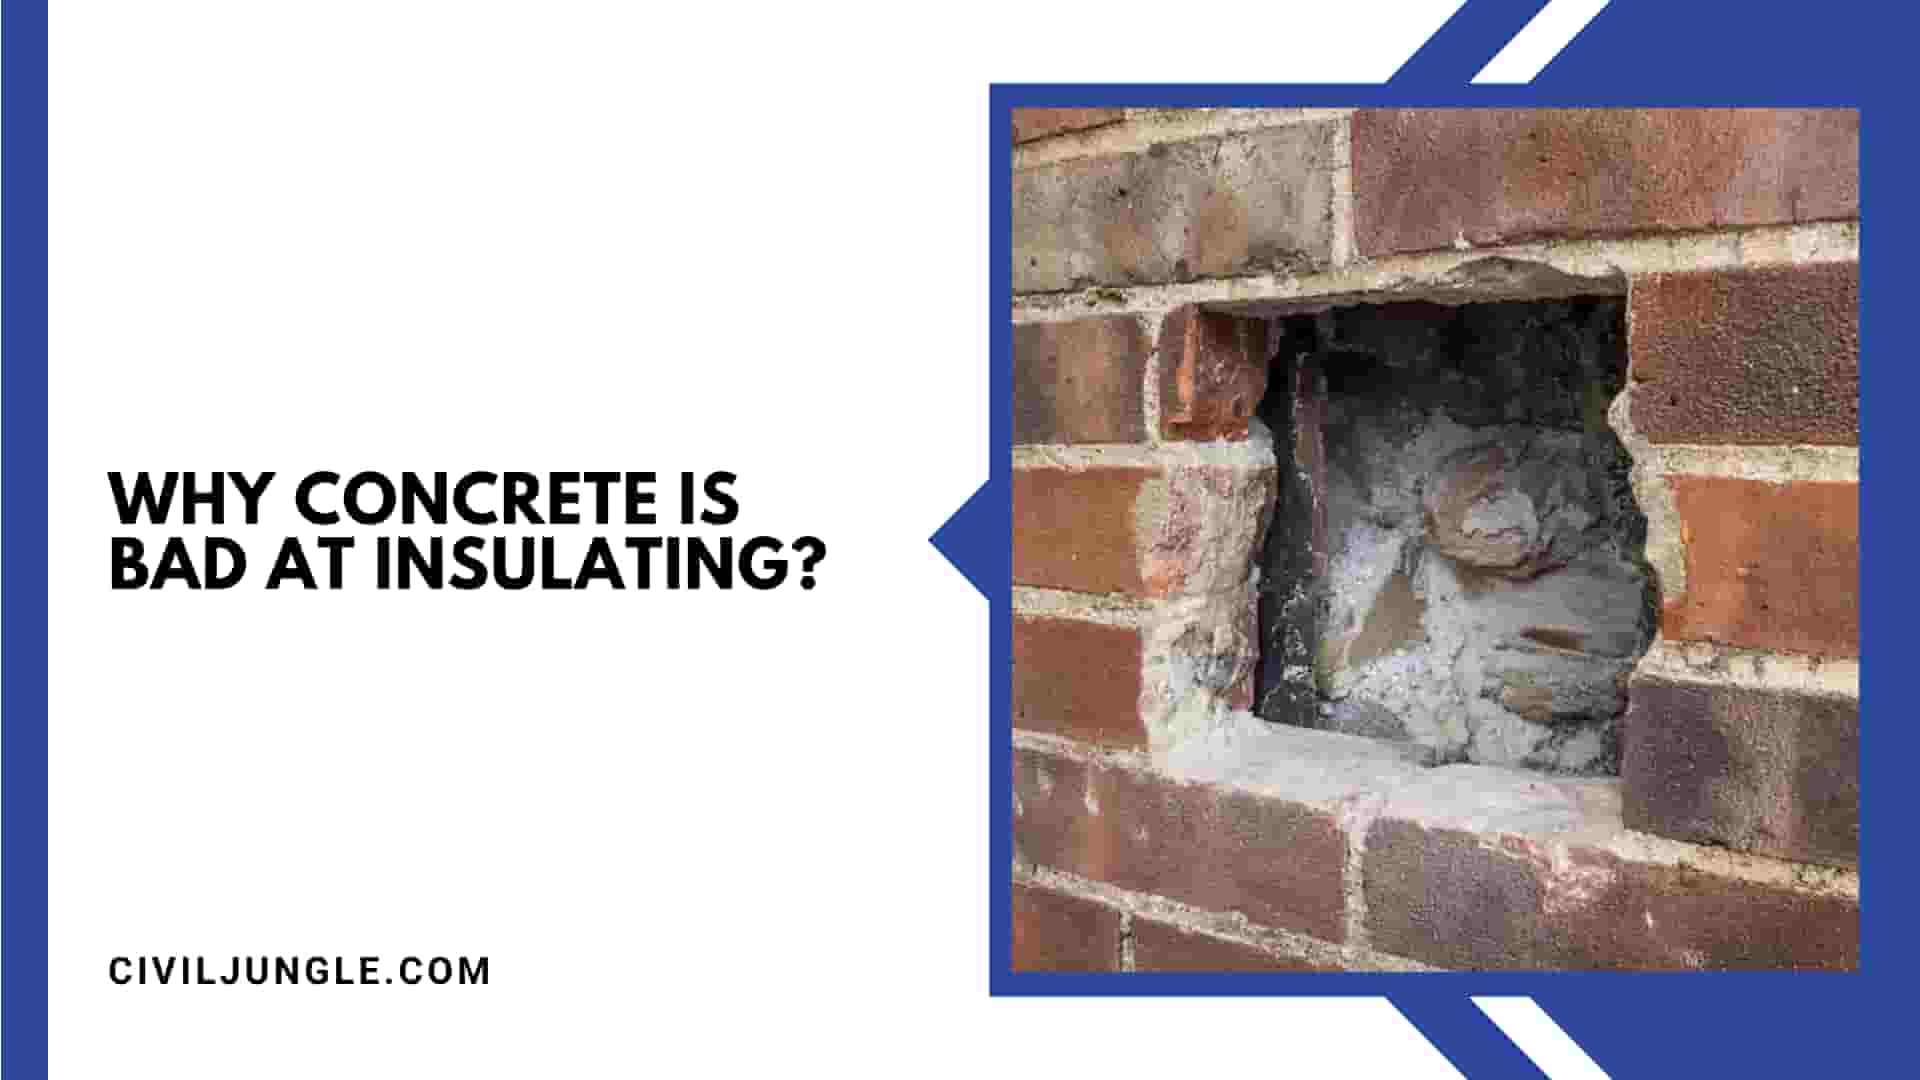 Why Concrete Is Bad at Insulating?